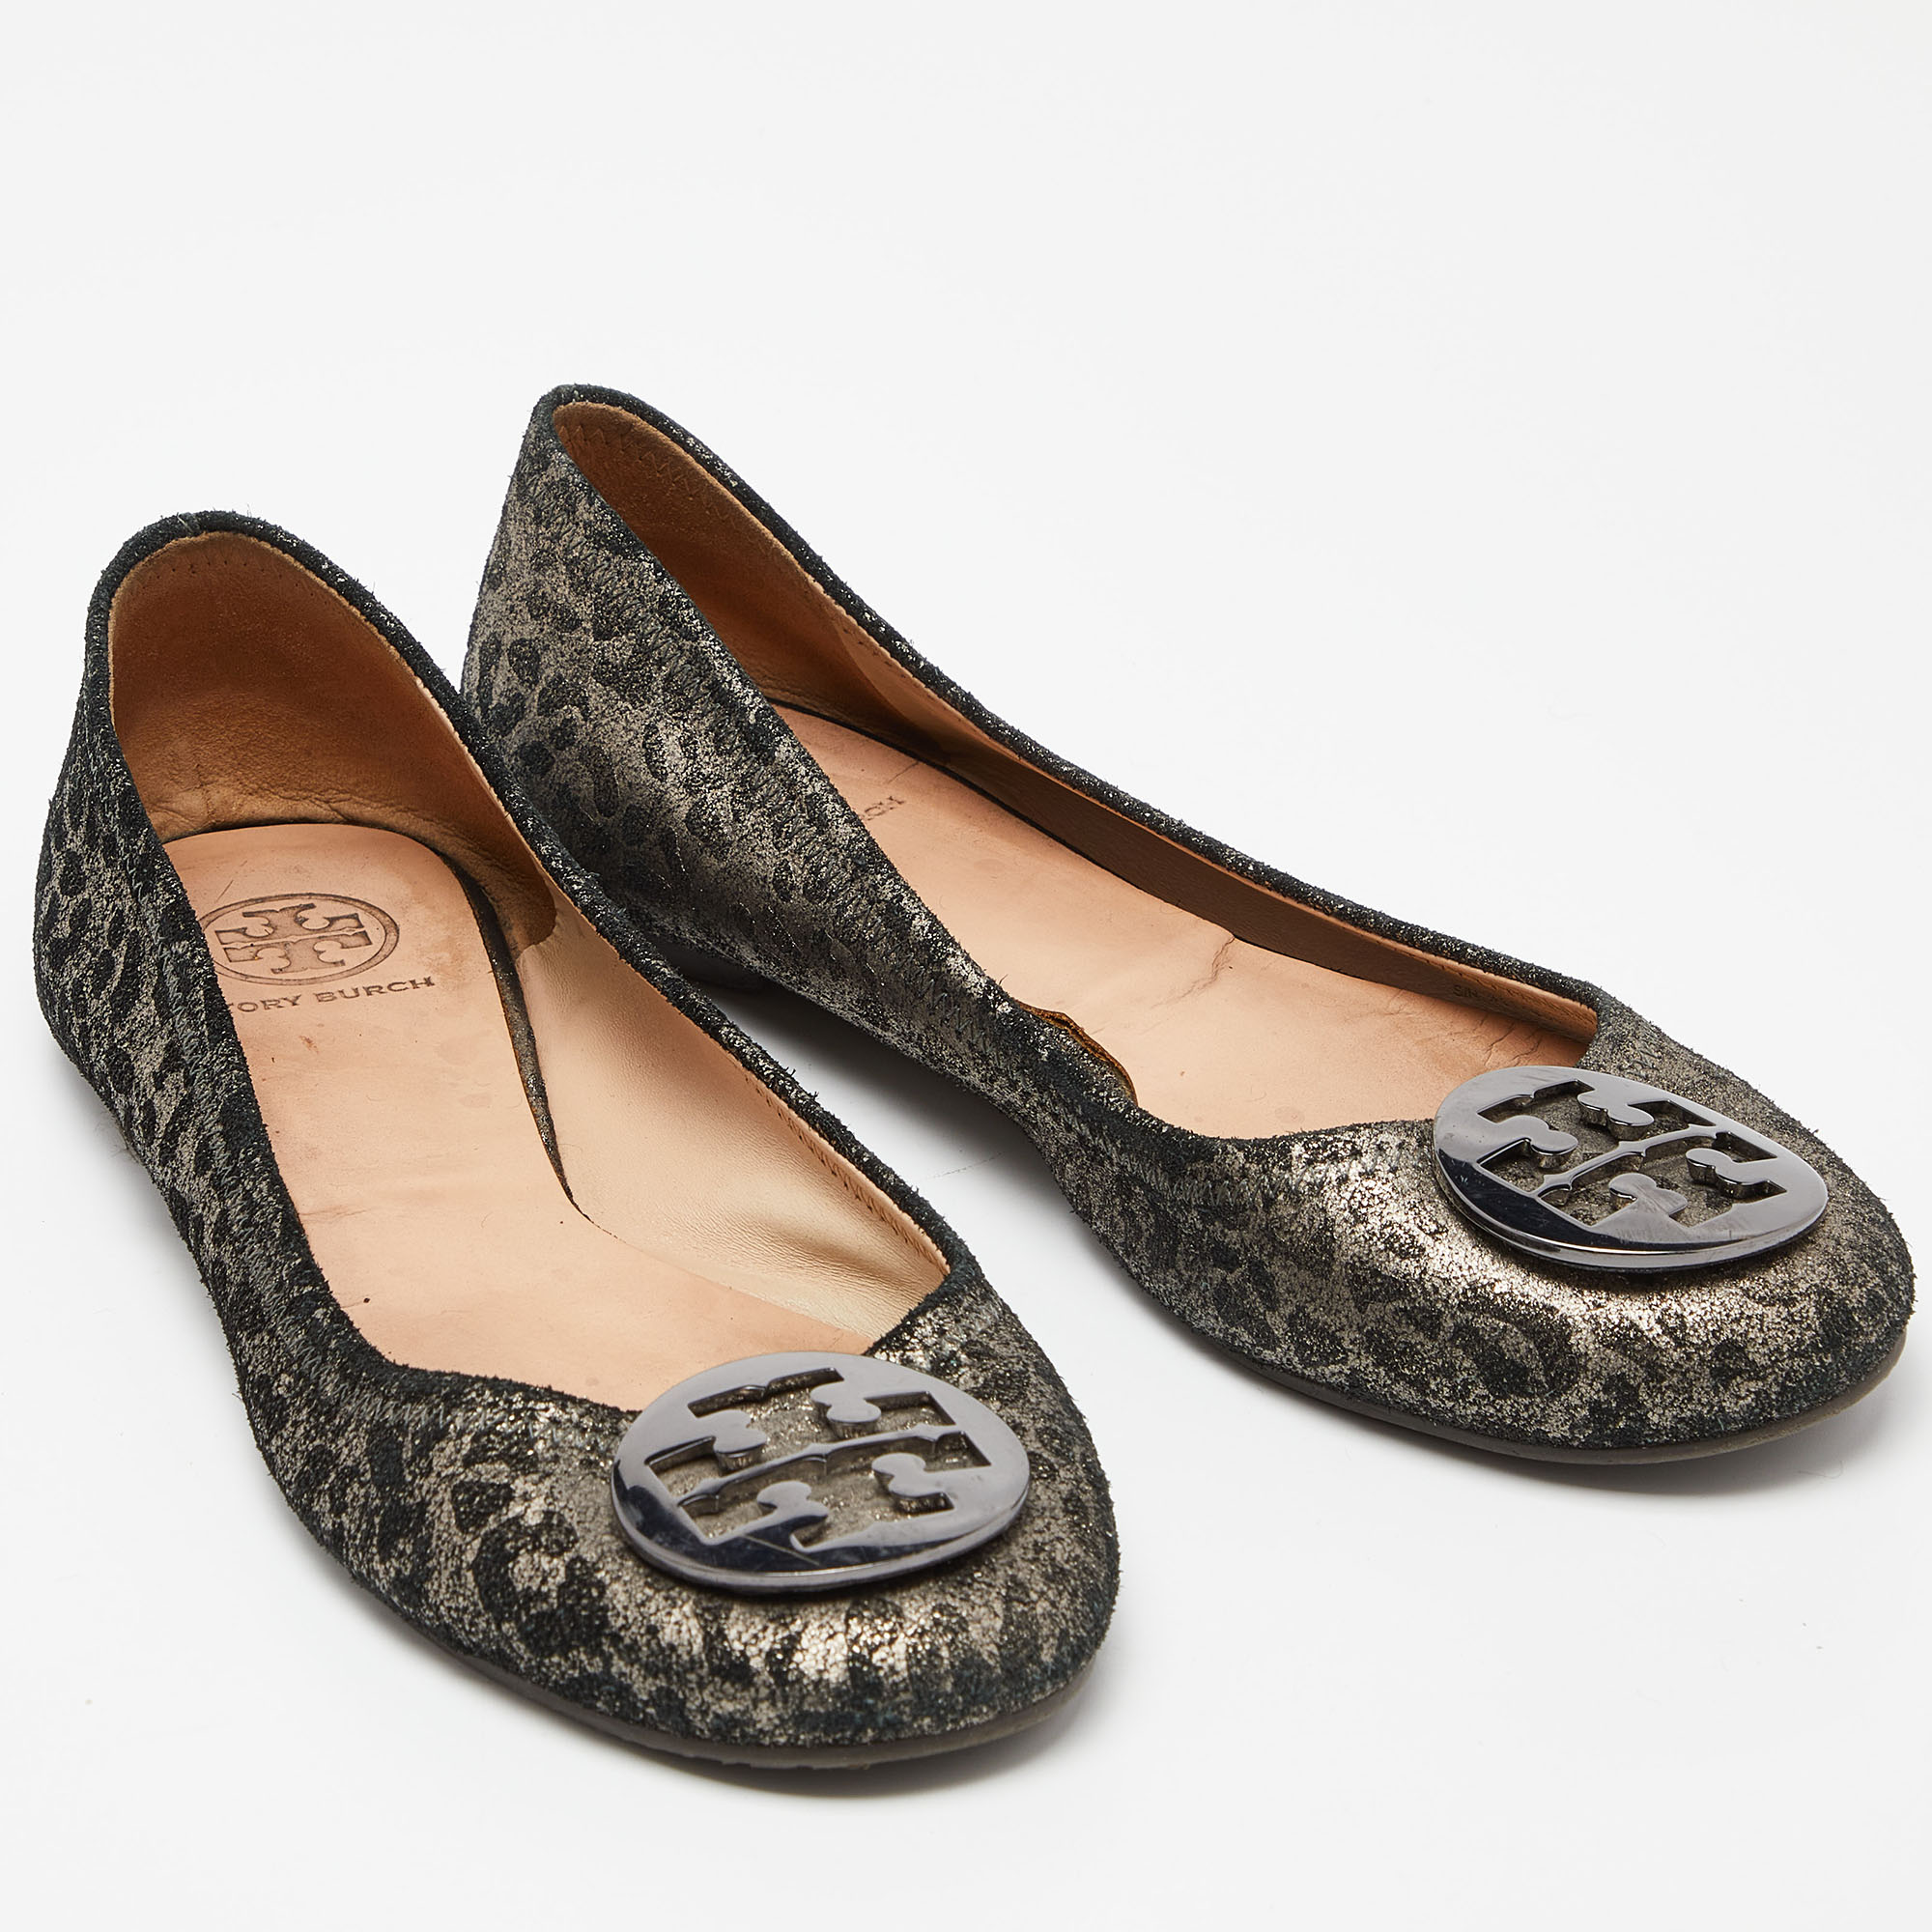 Tory Burch Printed Suede Luisa Micro Ballet Flats Size 40